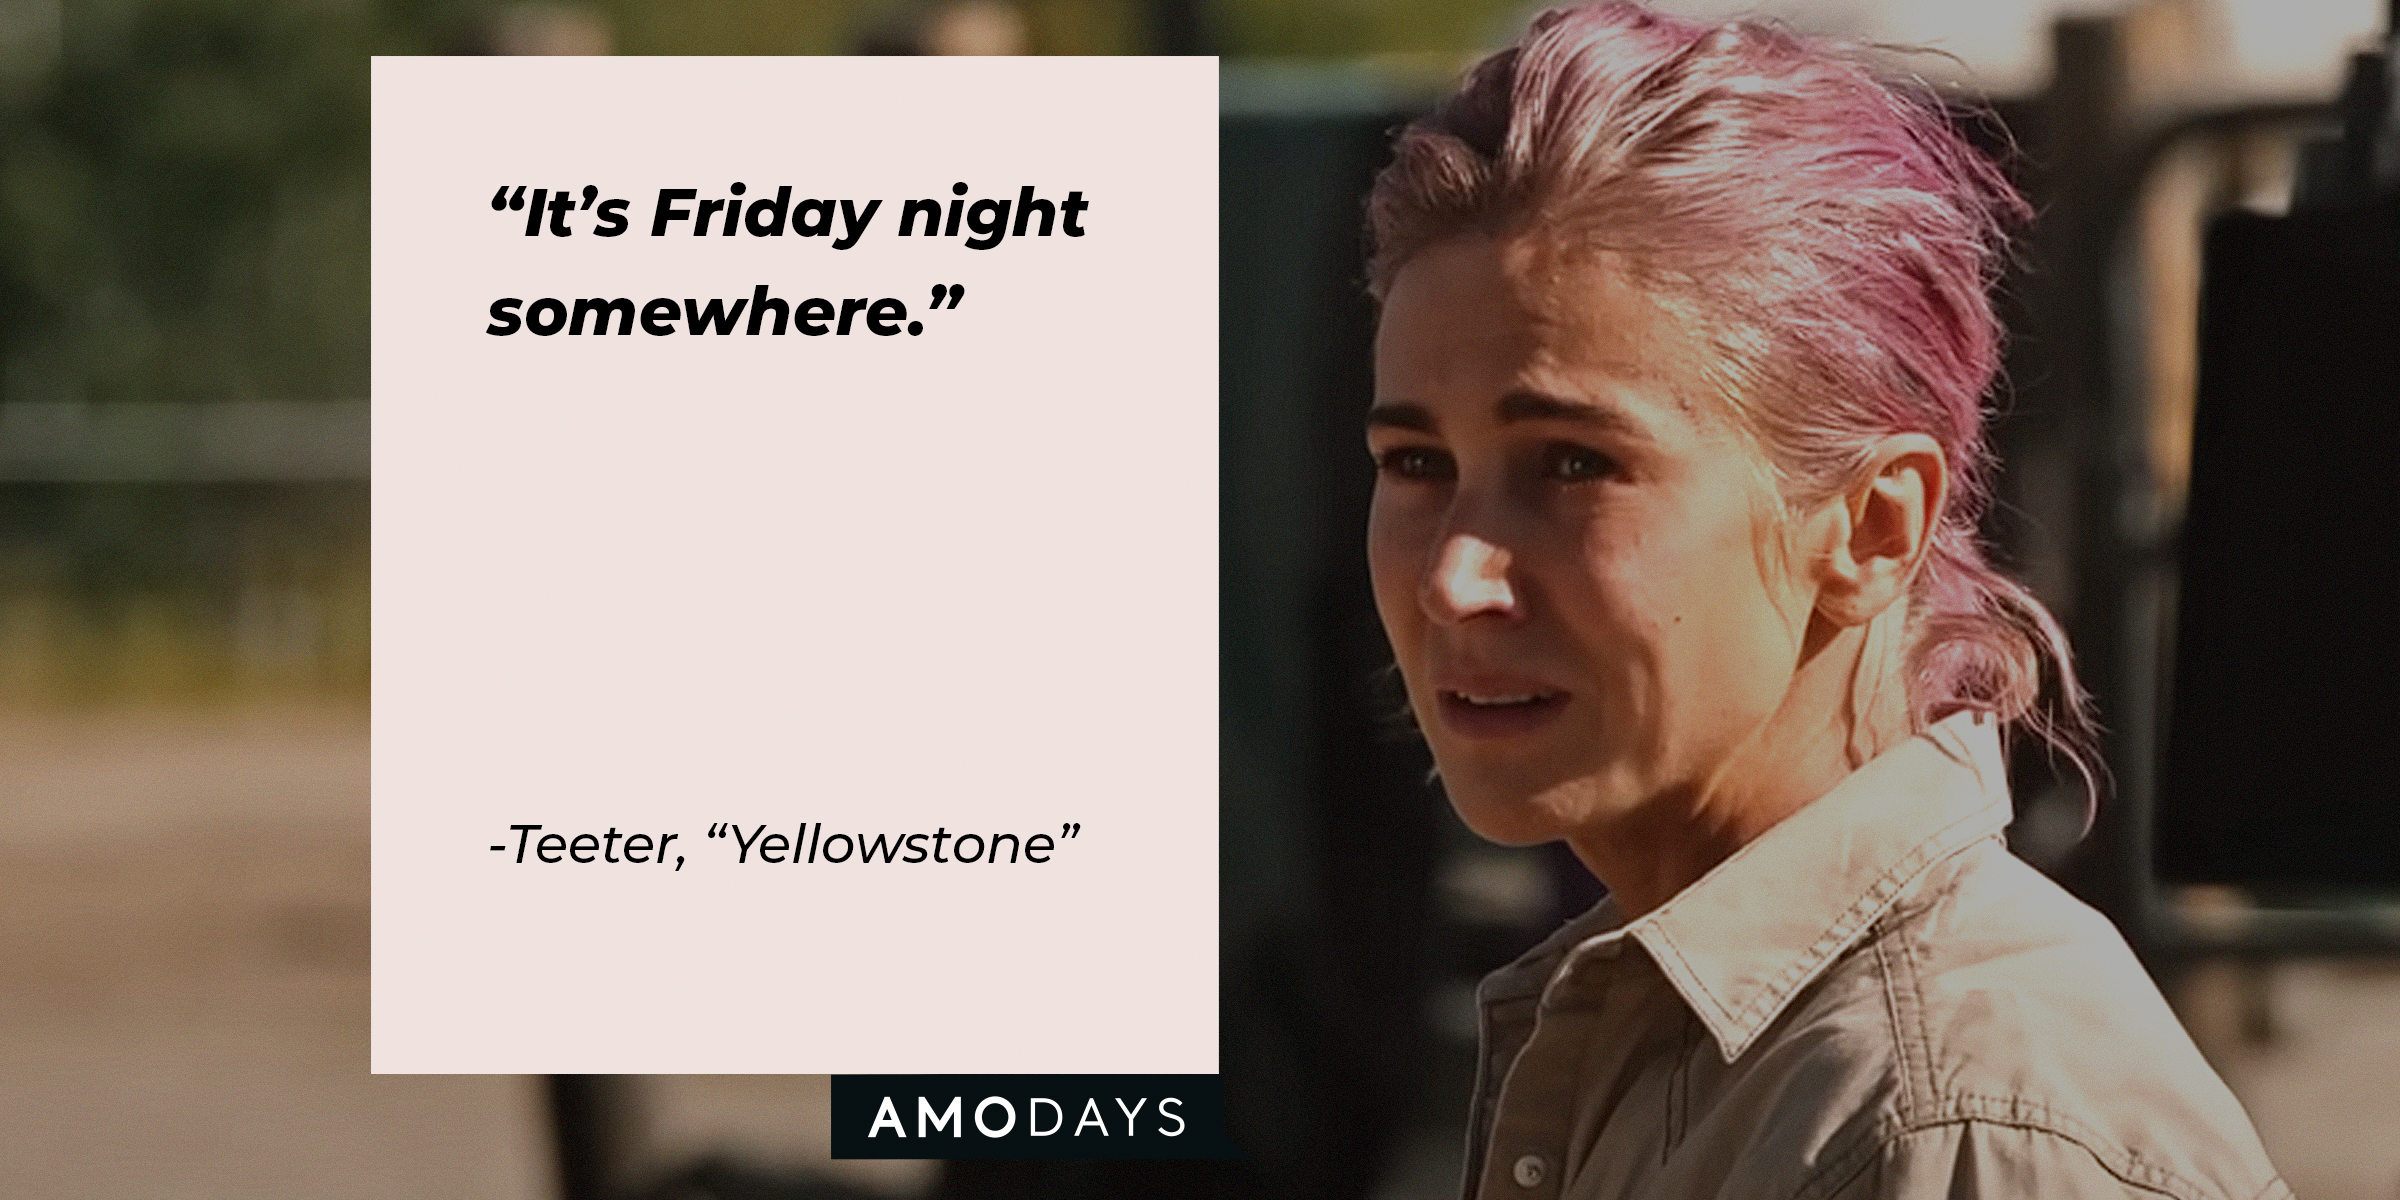 Teeter's image with a quote from "Yellowstone": "It’s Friday night somewhere." | Source: youtube.com/yellowstone